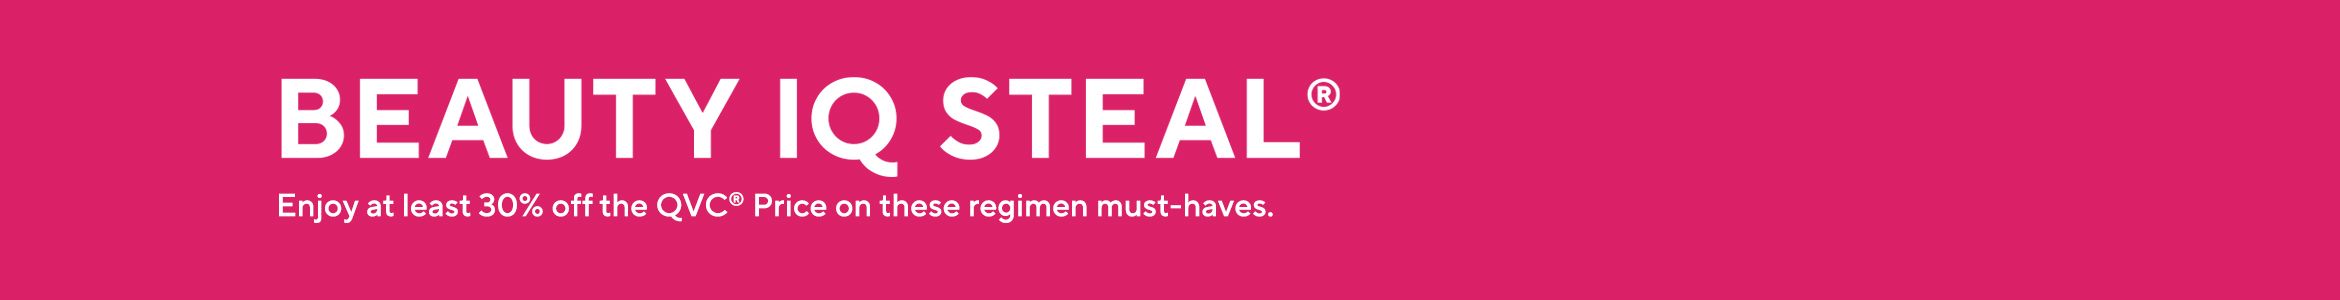 Beauty iQ Steal®  - Enjoy at least 30% off the QVC® Price on these regimen must-haves.